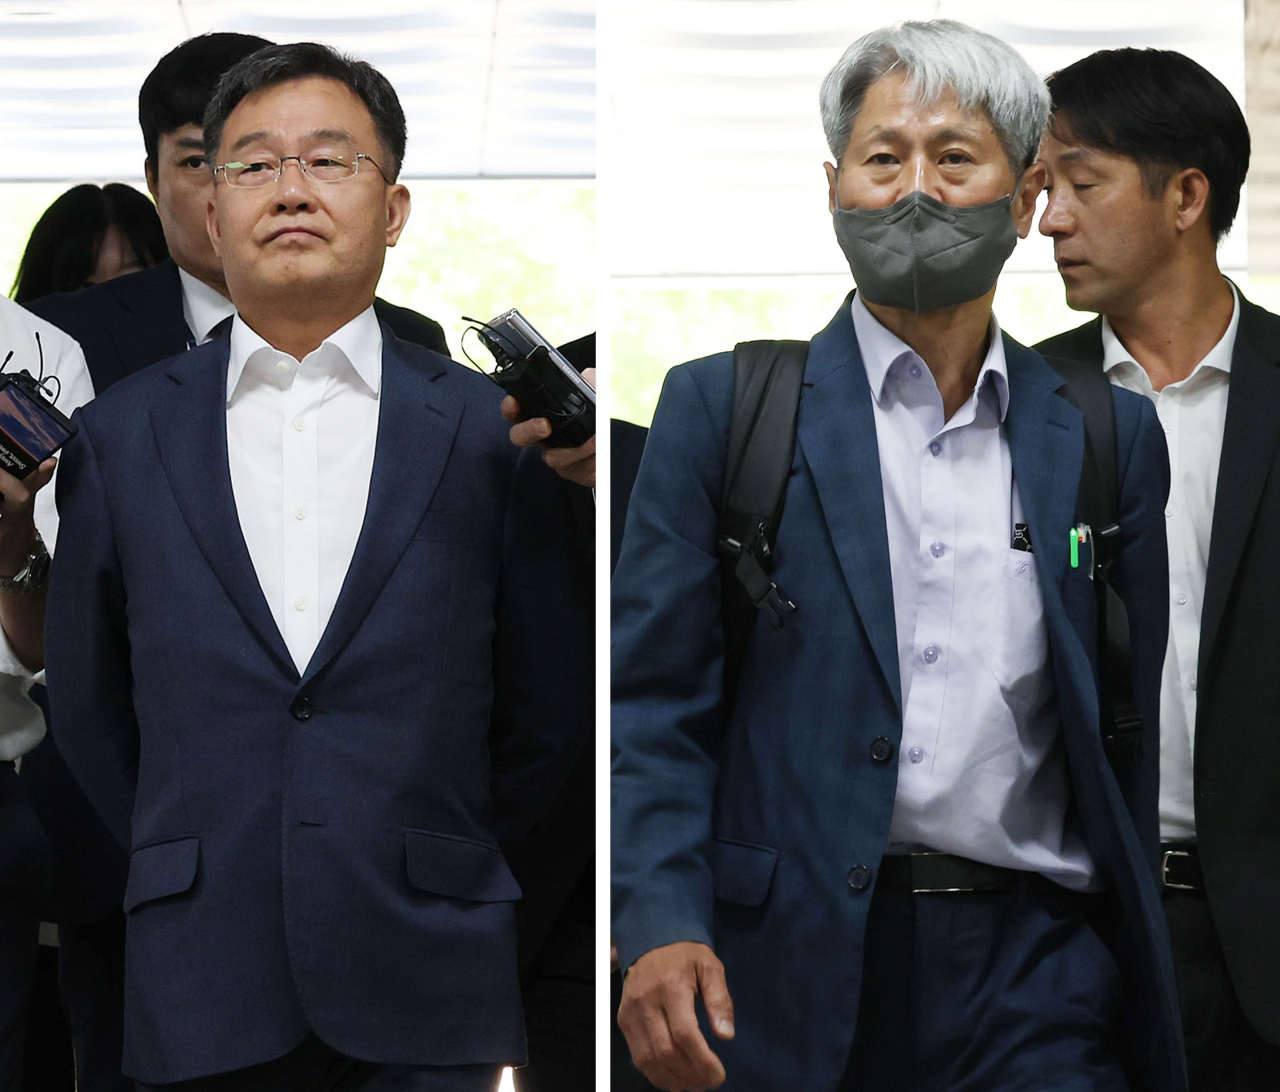 Kim Man-bae (left), a journalist-turned-property developer, and journalist Shin Hak-lim arrive at the Seoul Central District Court on Thursday for a court hearing. (Yonhap)